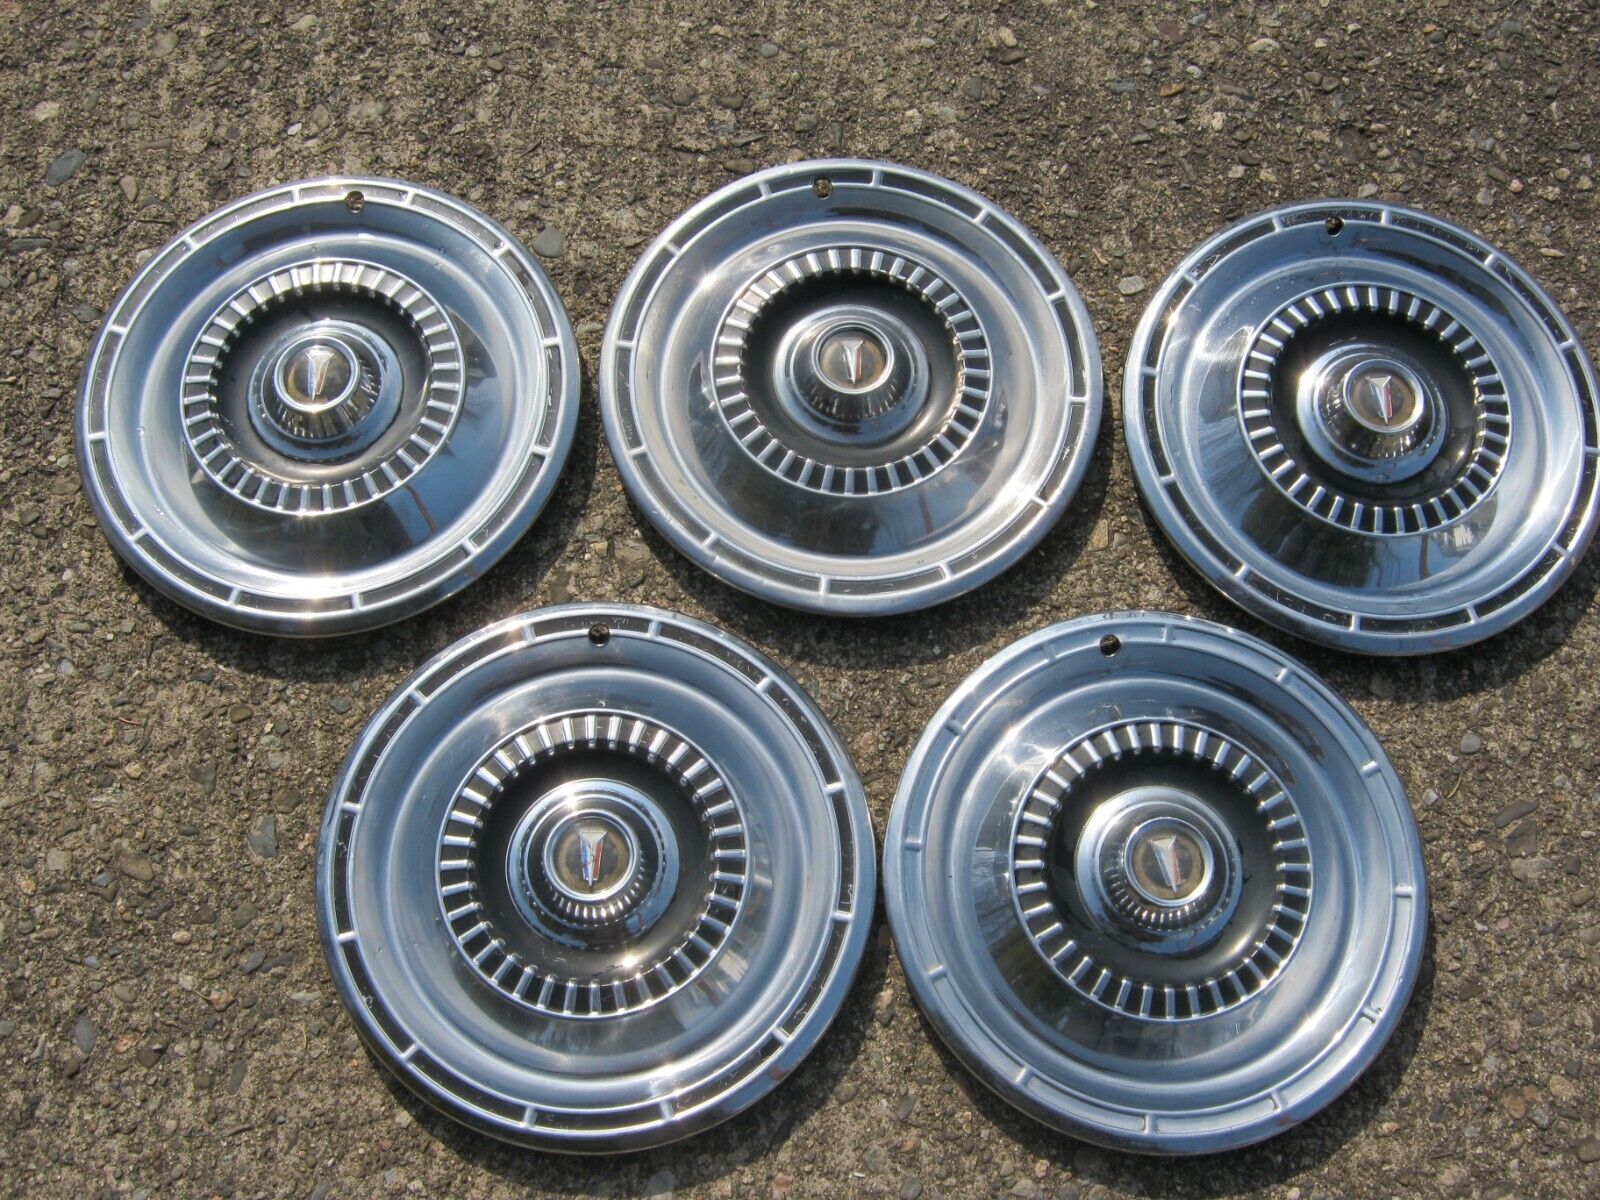 Lot of 5 factory 1965 Plymouth Belvedere Satellite 14 inch hubcaps wheel covers